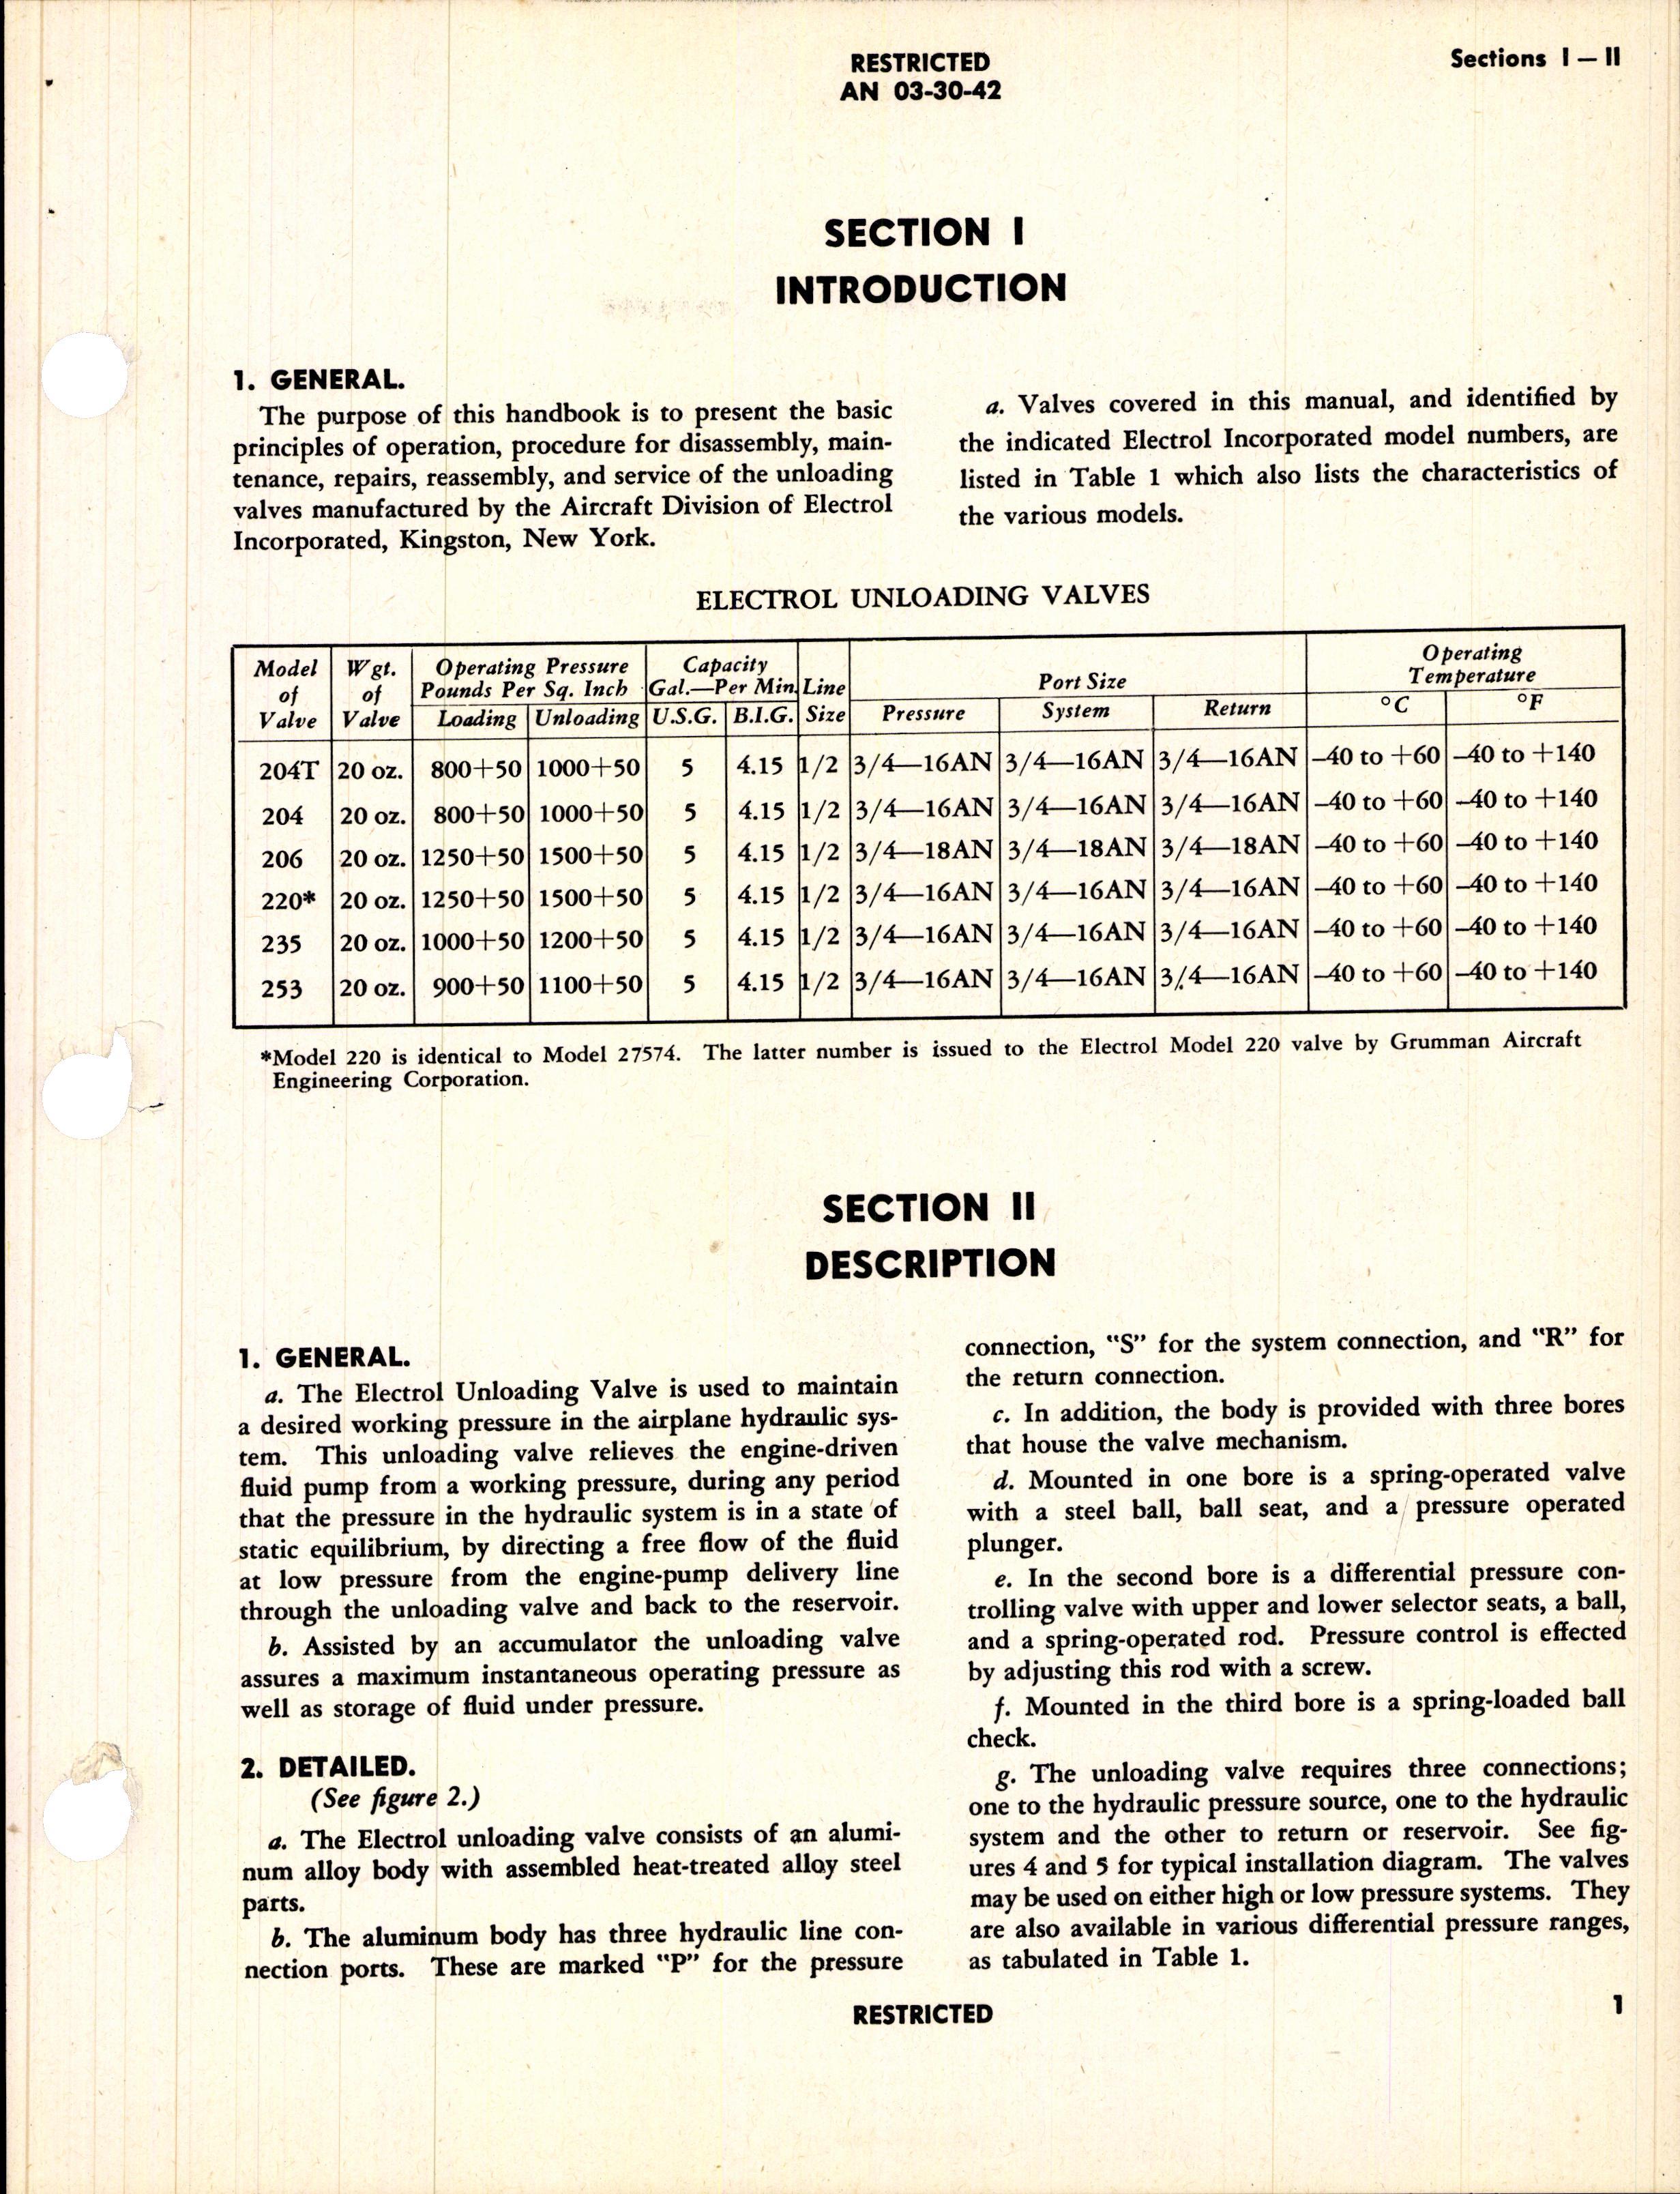 Sample page 5 from AirCorps Library document: Handbook of Instructions with Parts Catalog for Unloading Valves